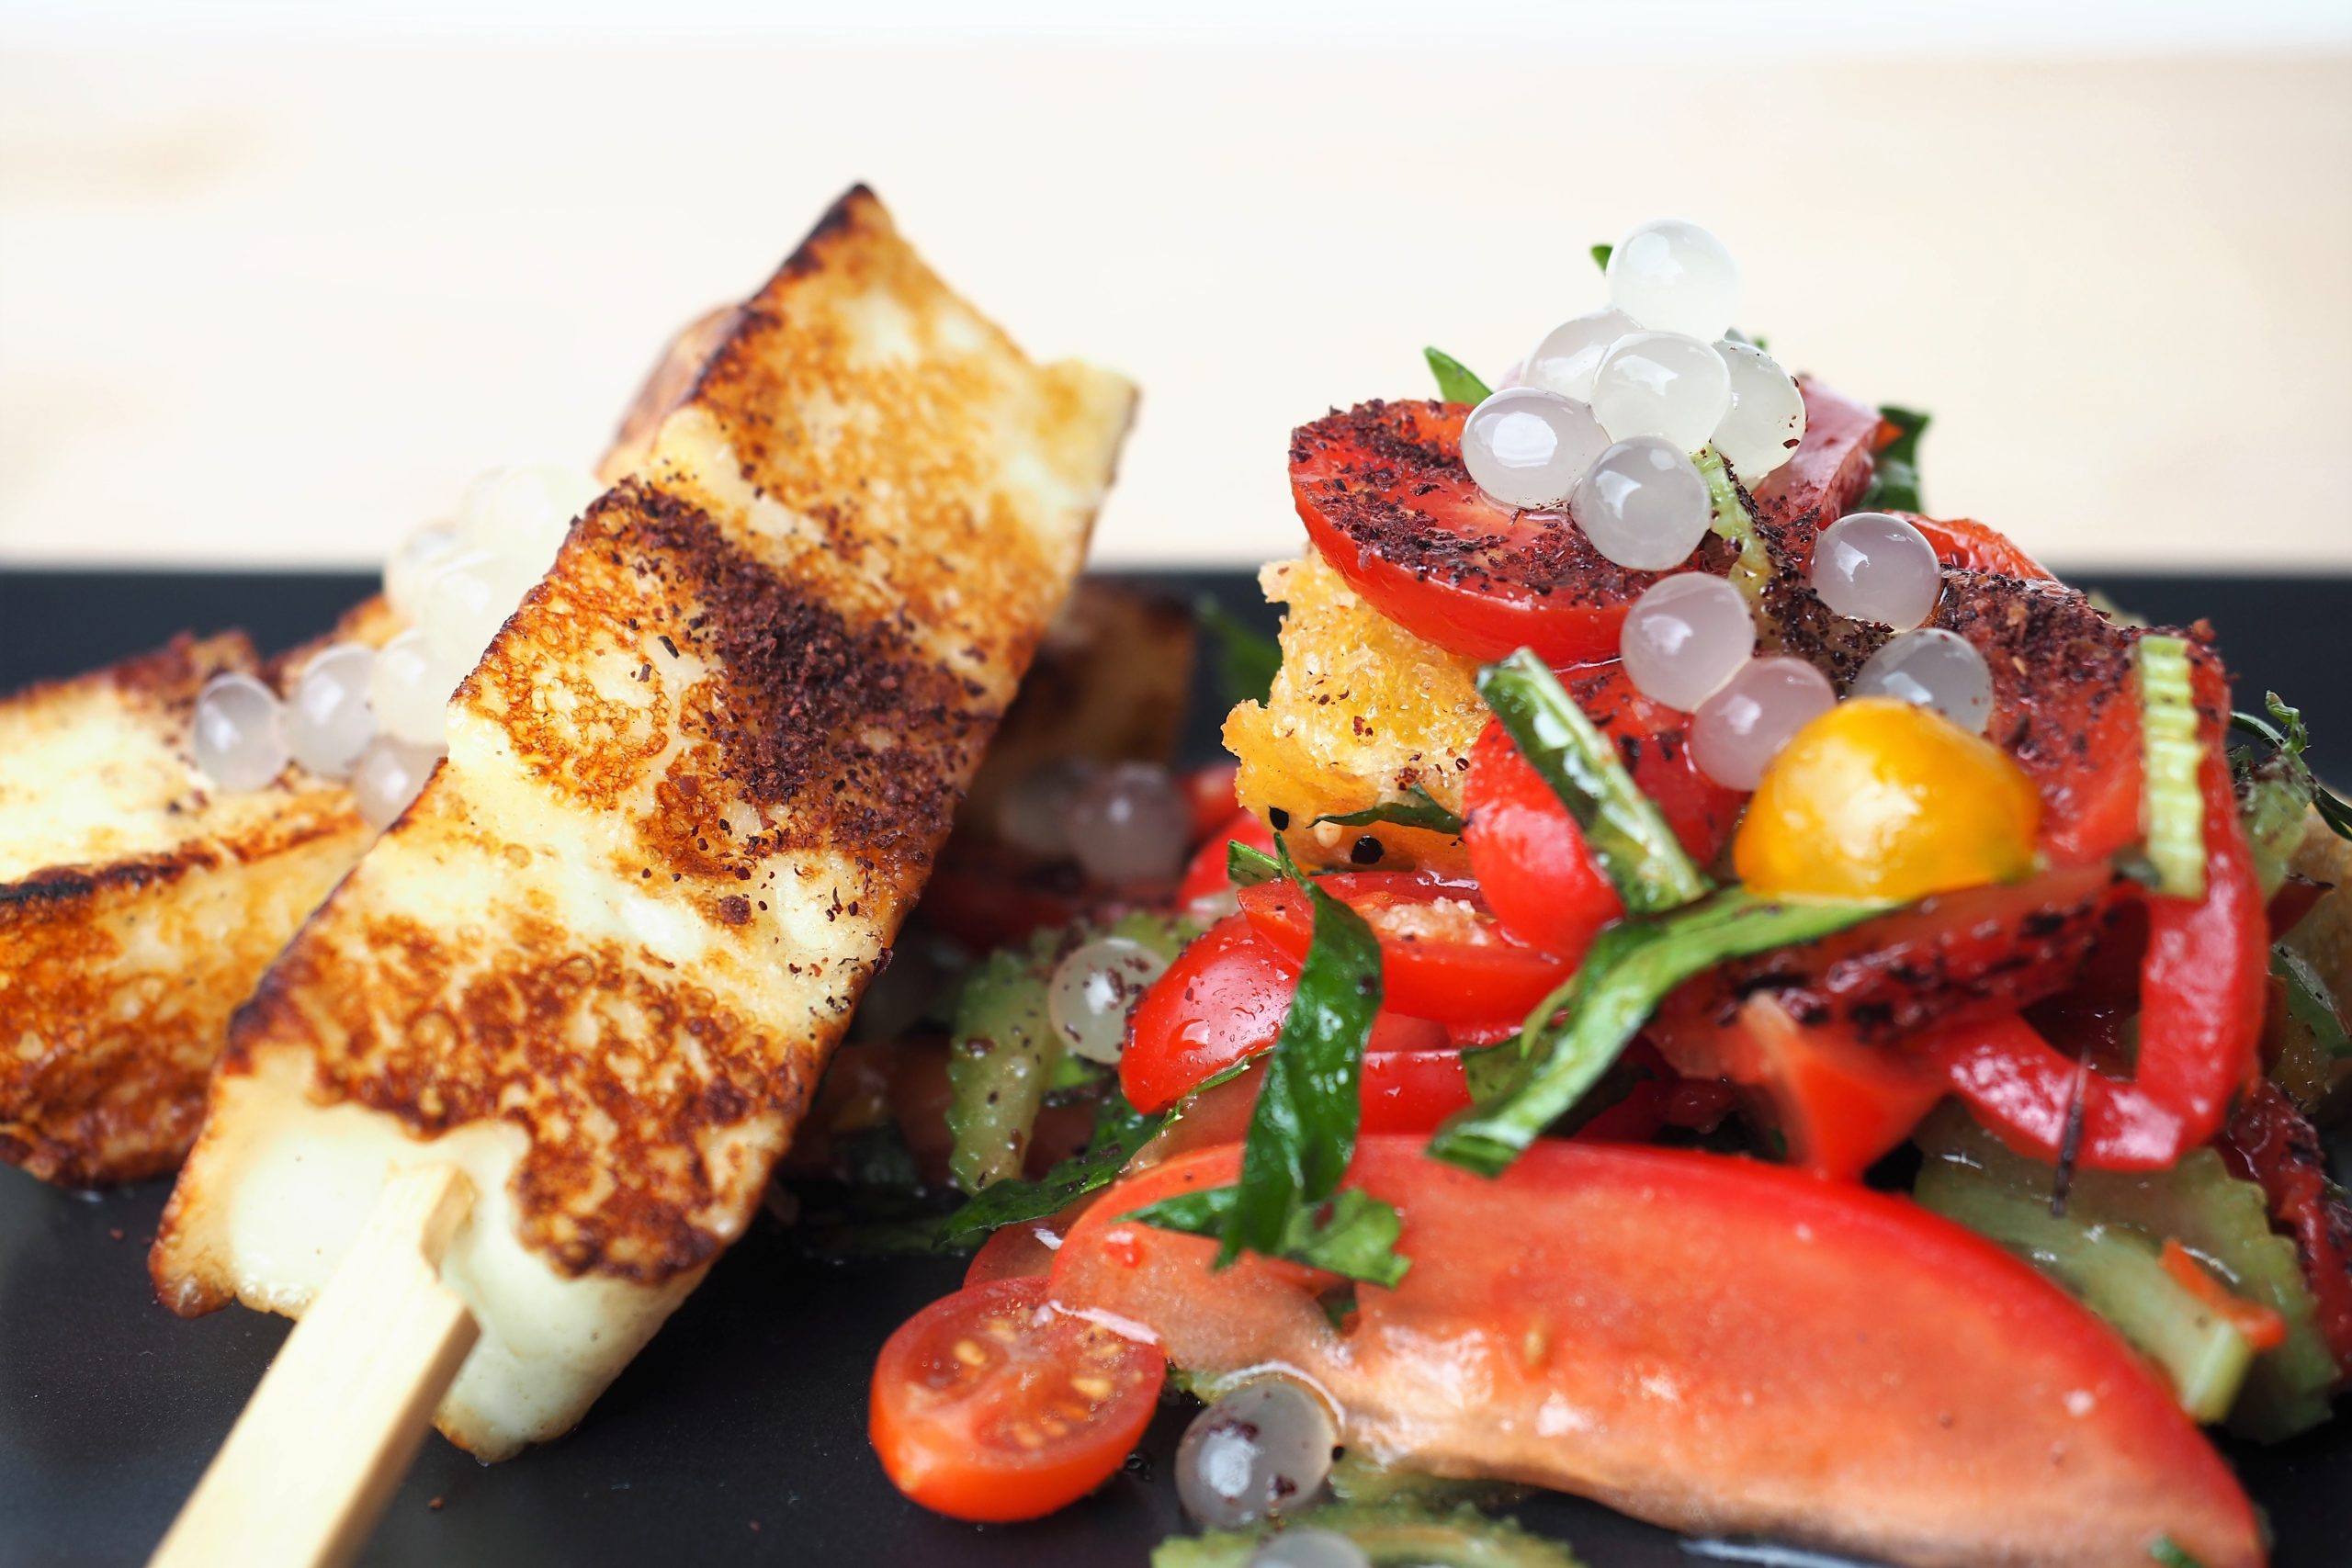 Halloumi Skewers with Tomato Salad and Yuzu Flavour Pearls.